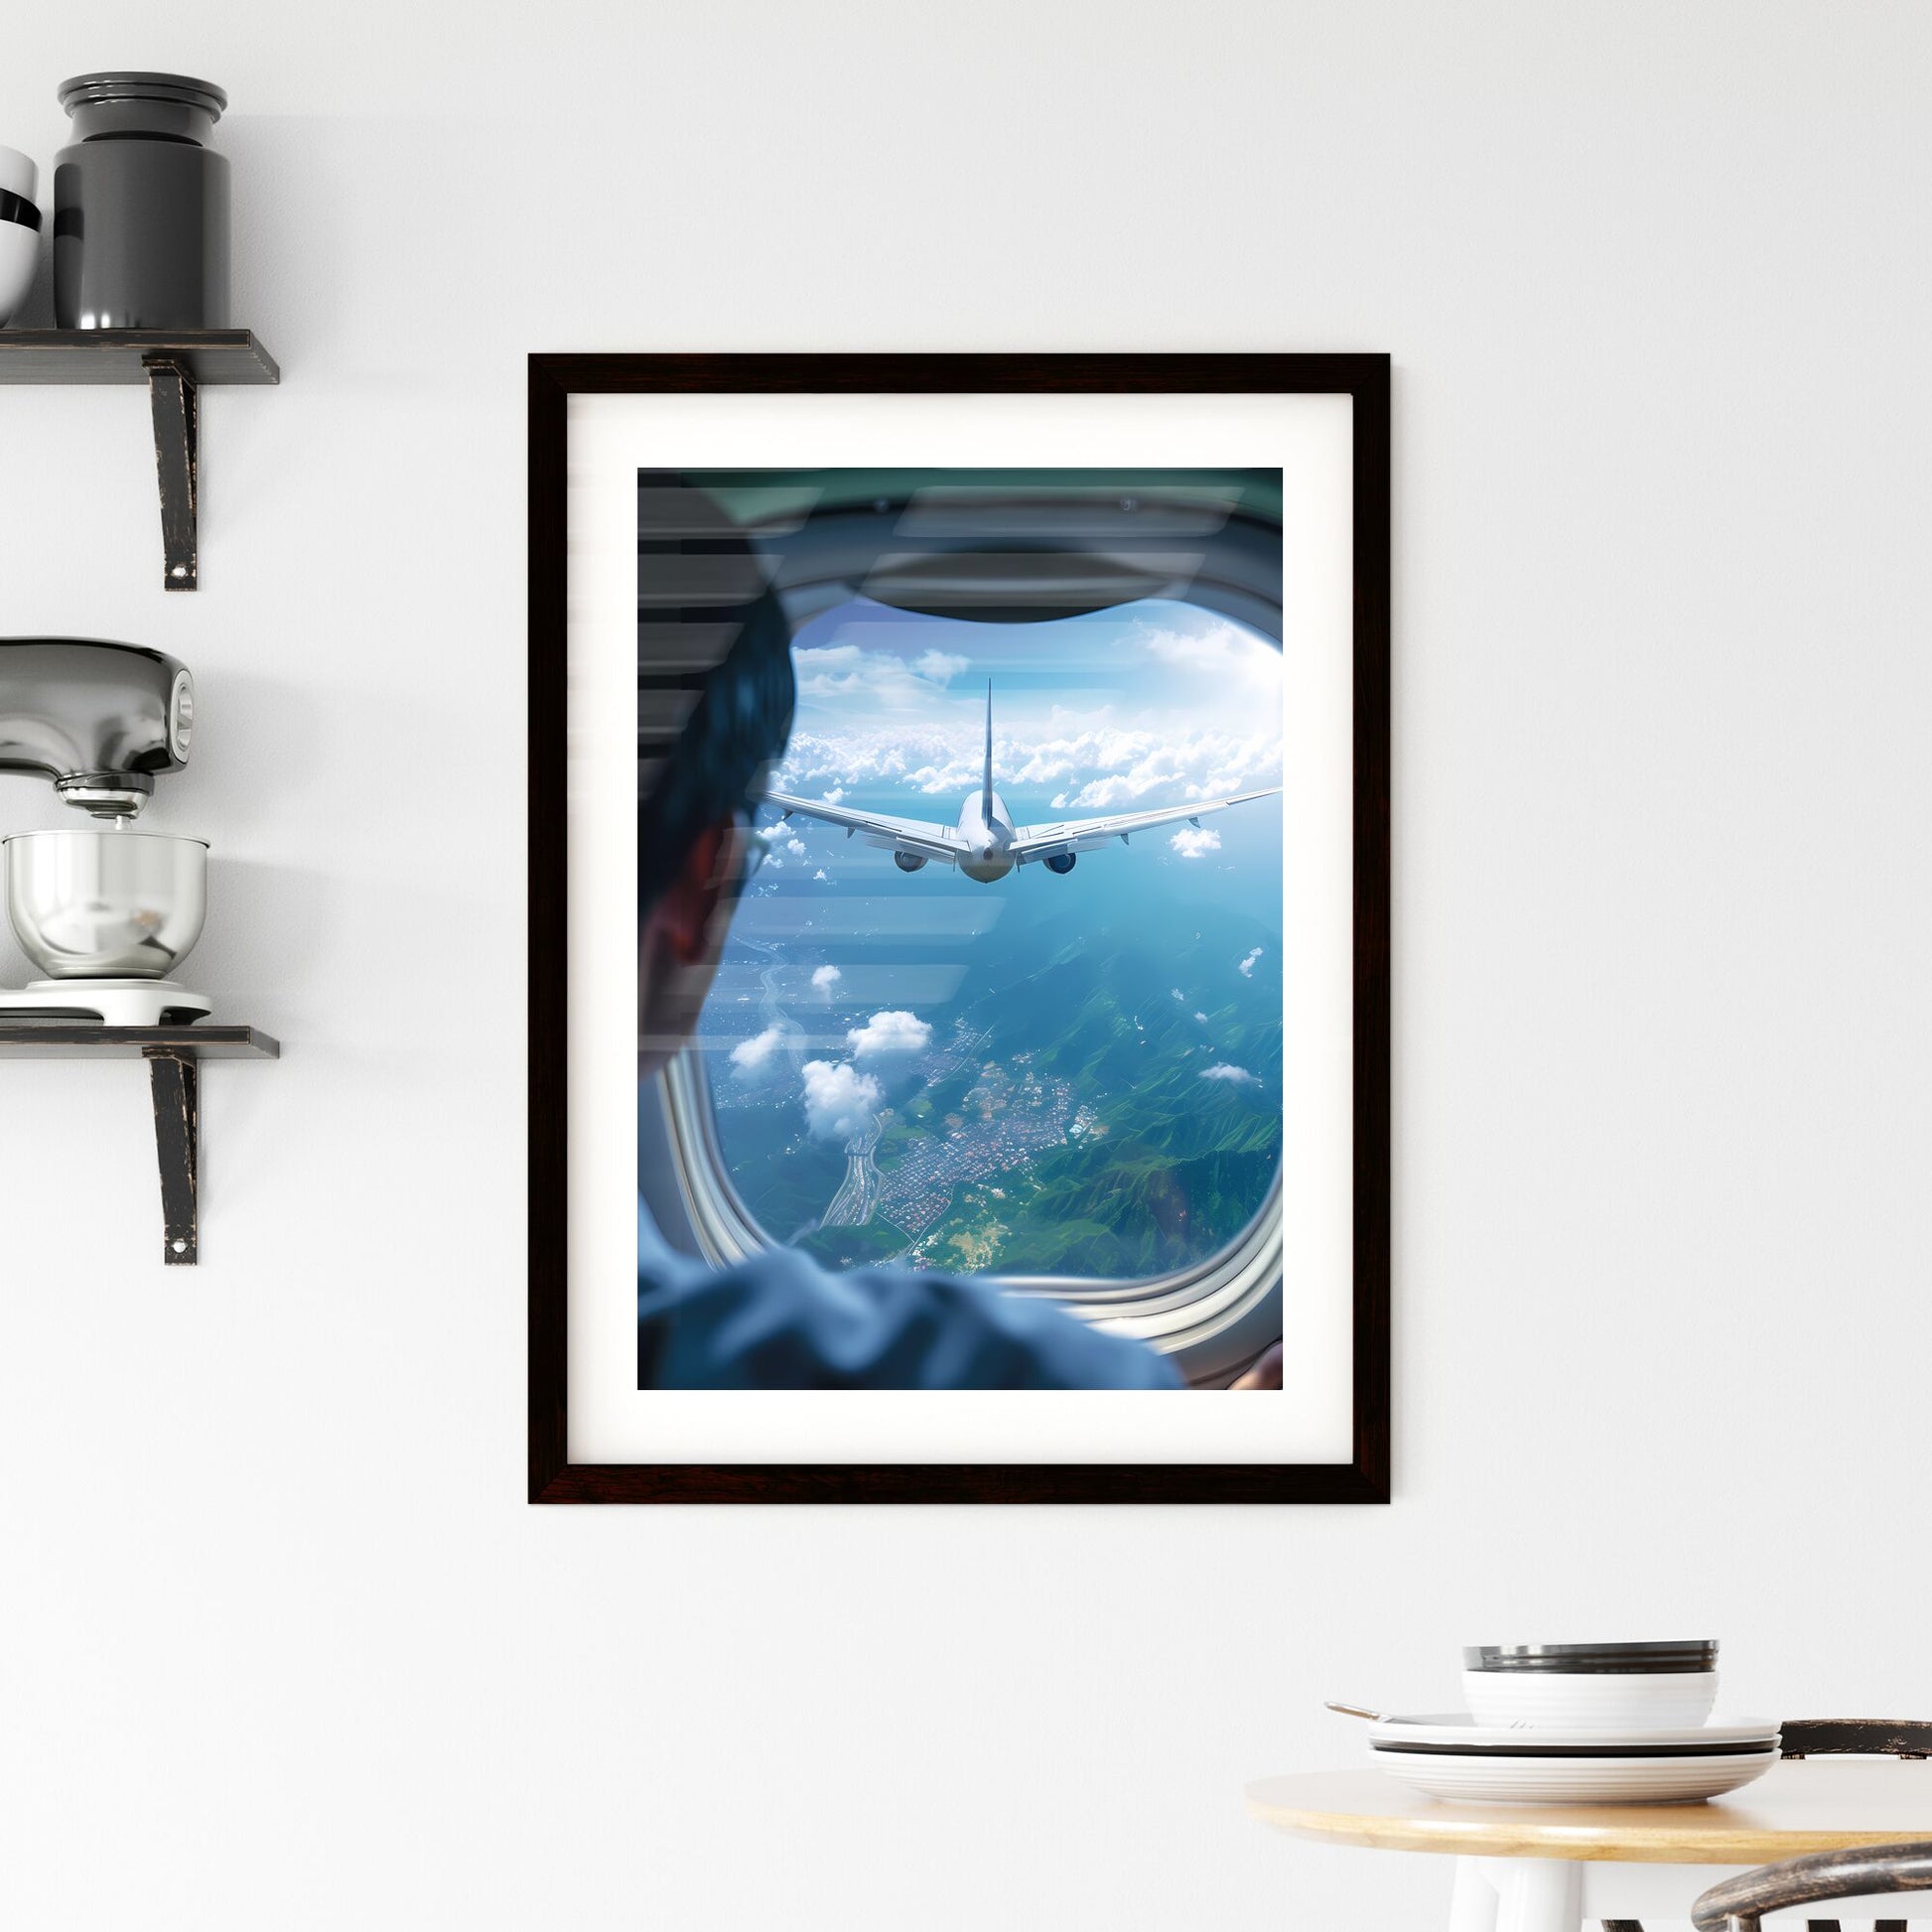 Take a break from the rush - Art print of a person looking out a window of an airplane flying over a landscape Default Title